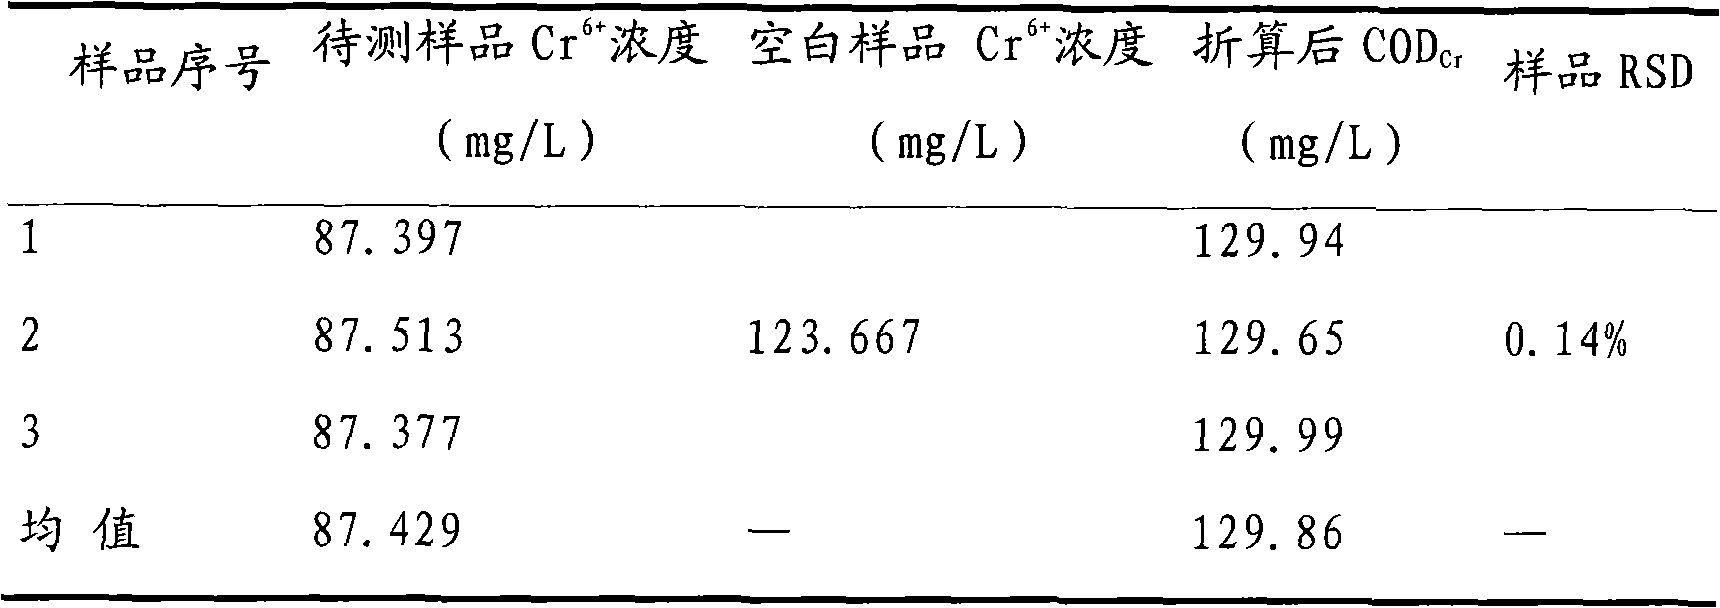 Chemical oxygen demand determination method for water bodies